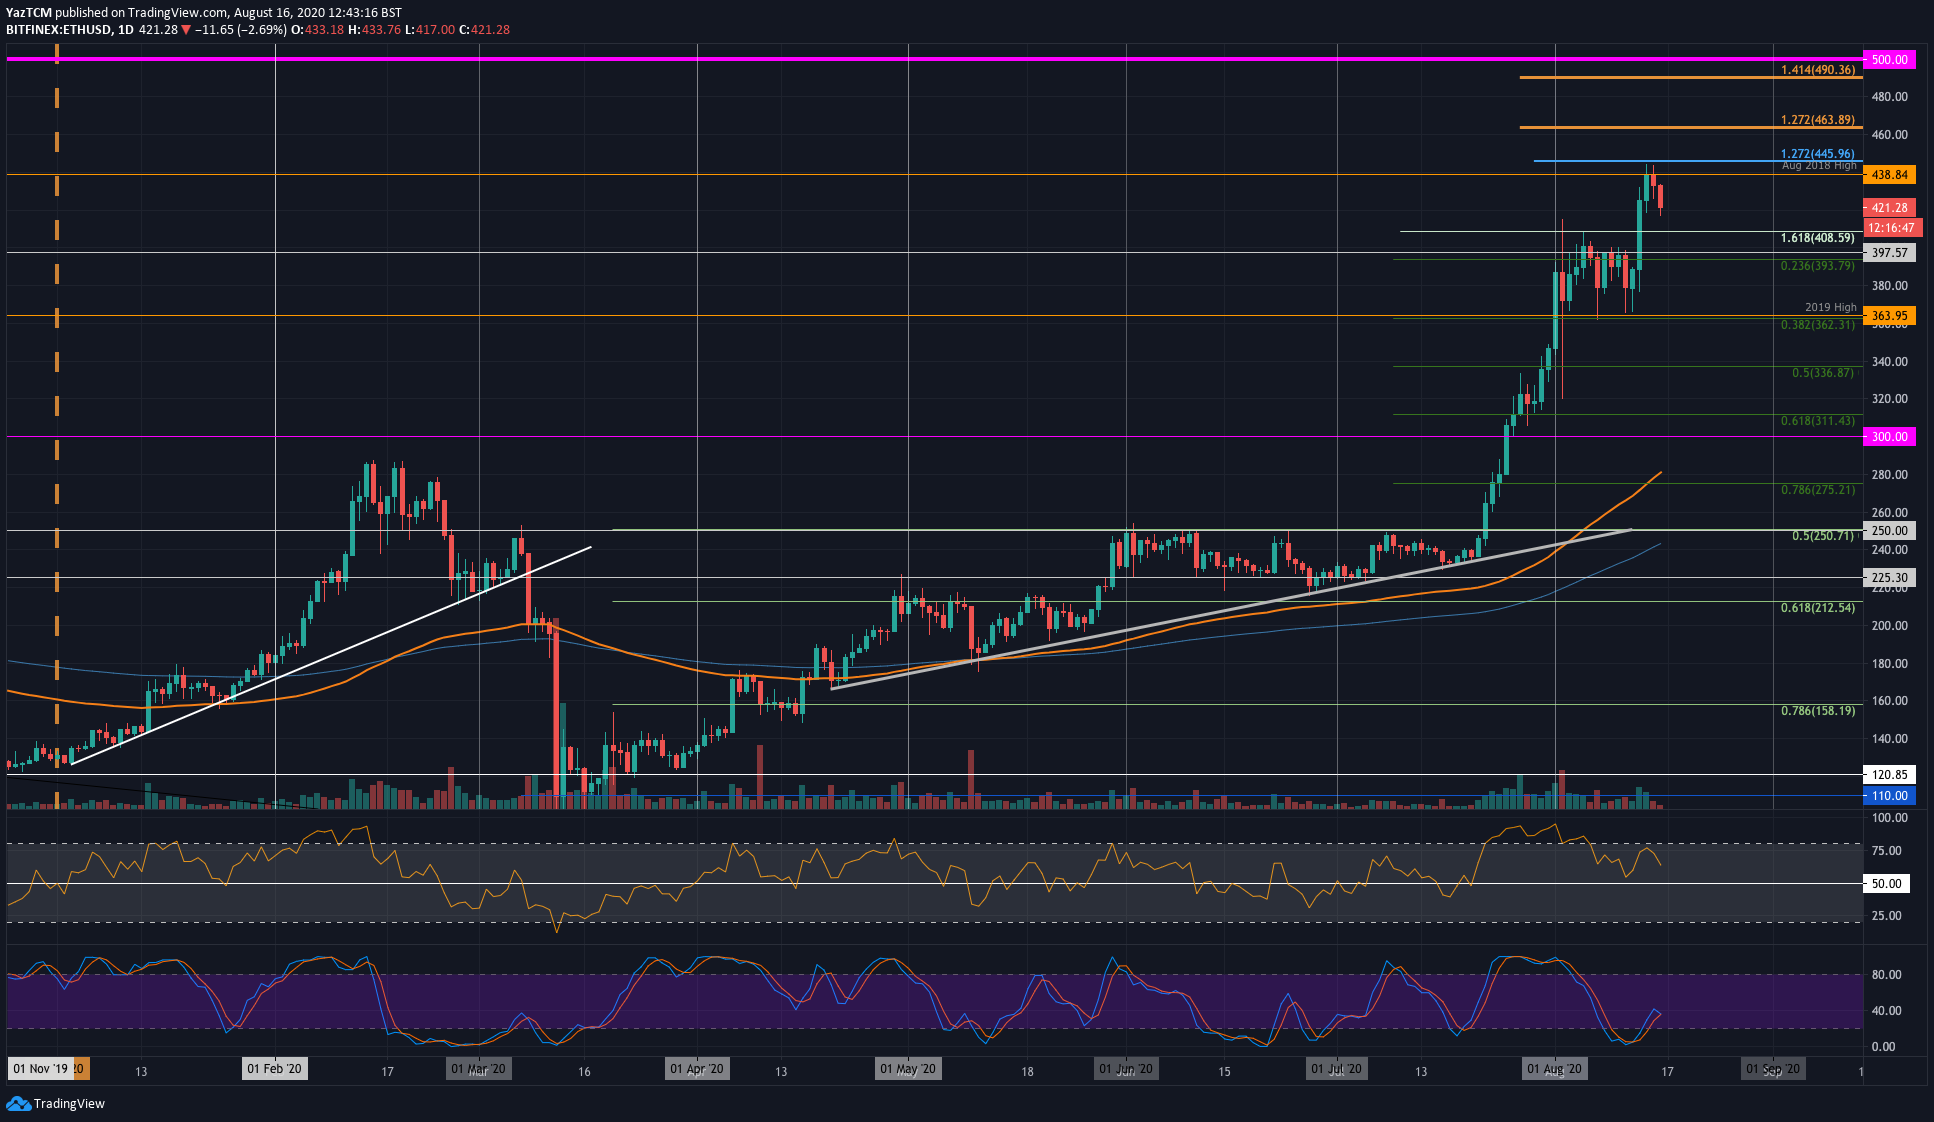 Ethereum Is Sliding Down: Will $400 Get Retested As Support Soon? (ETH Price Analysis)